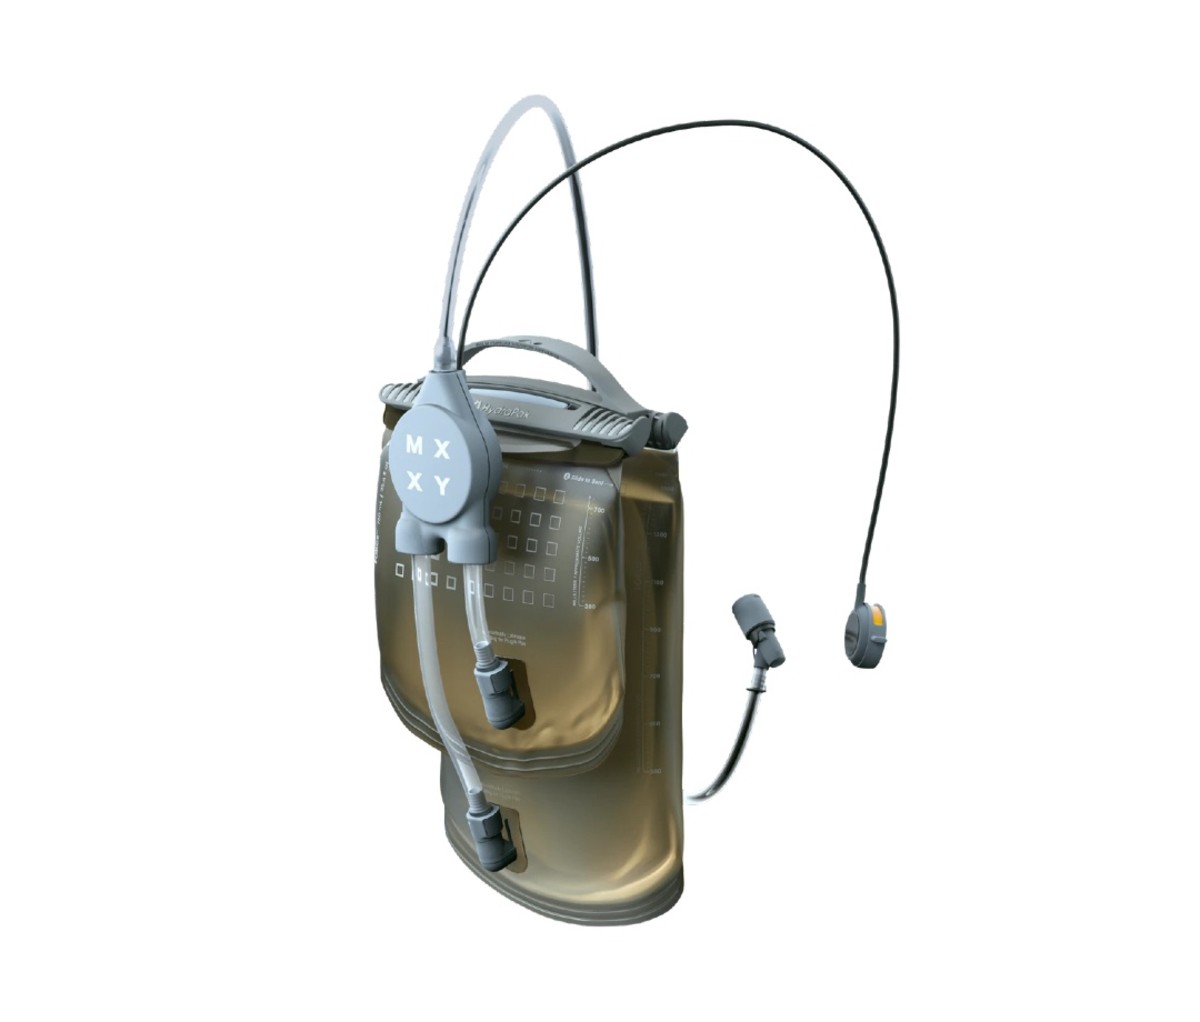 The MXXY hydration backpack system is the first to use to bladders to mix liquids.